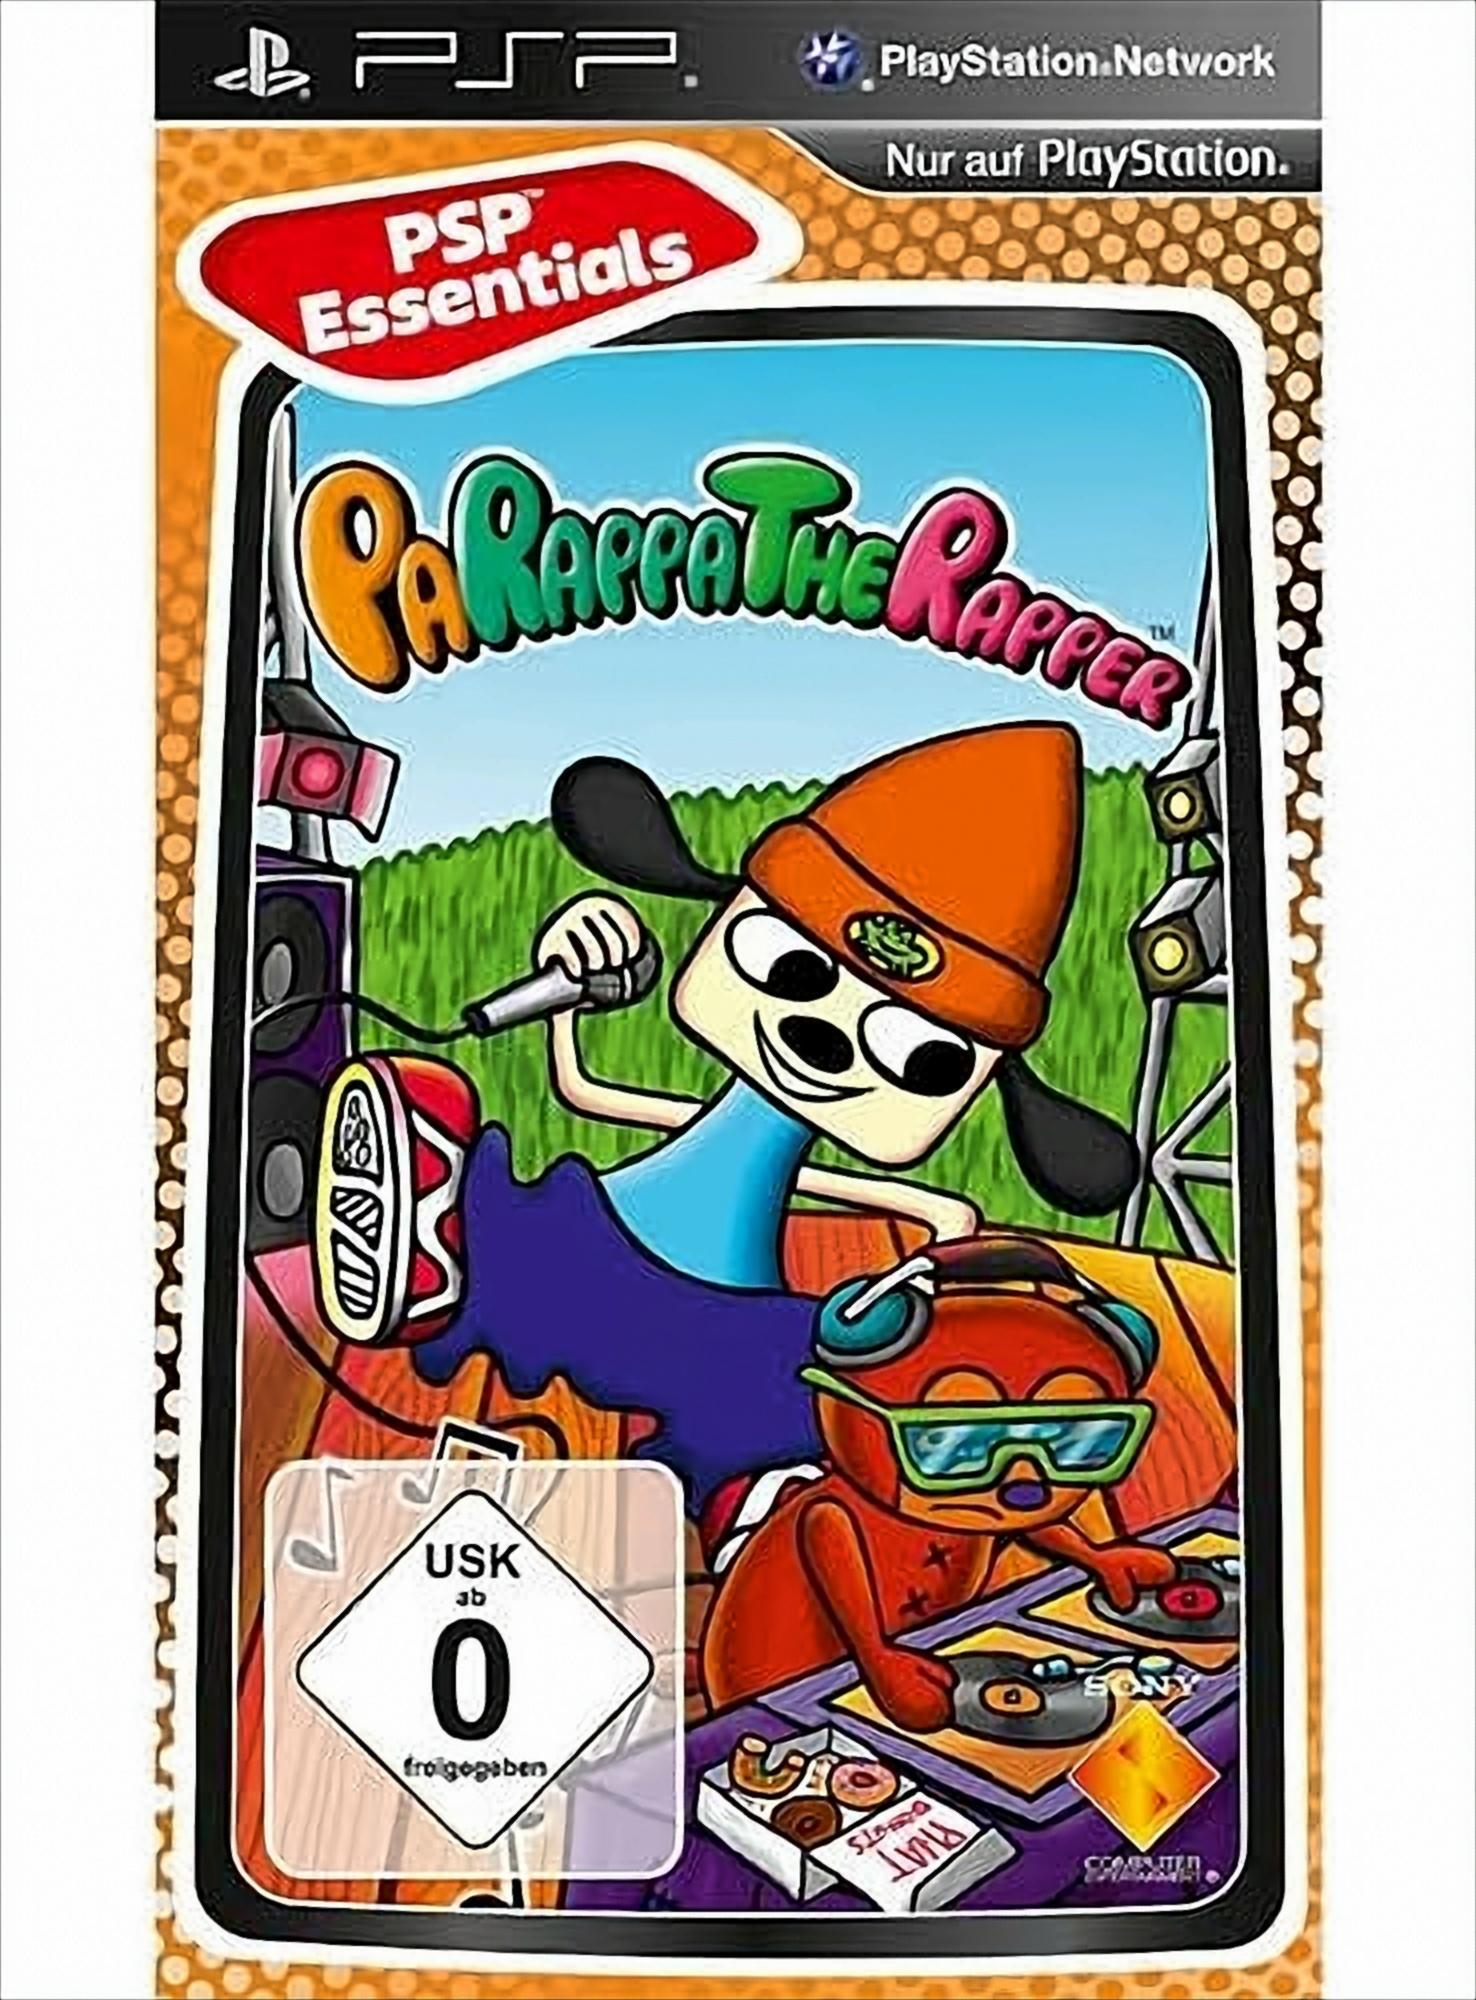 PaRappa The - Rapper [PSP